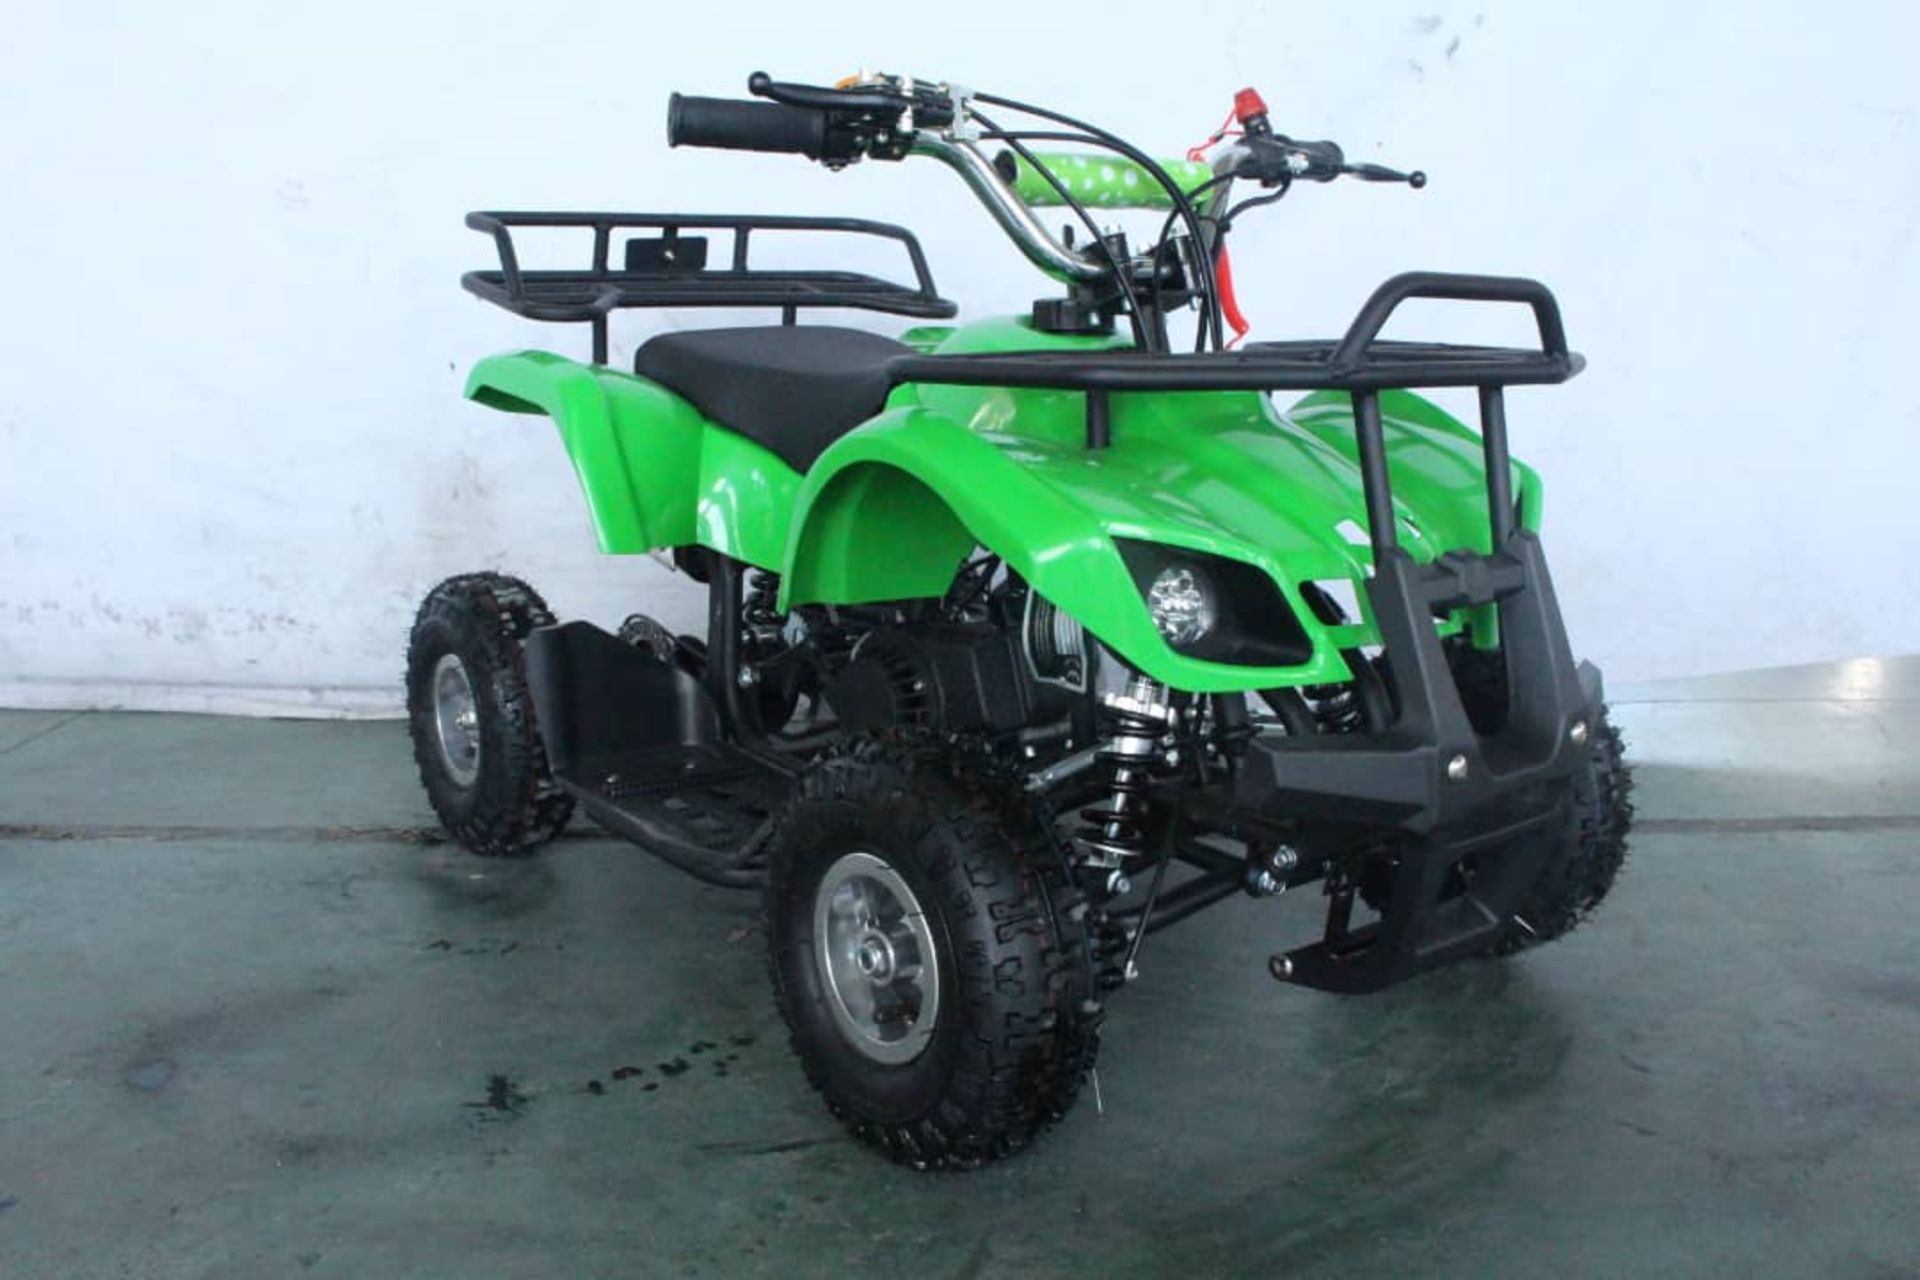 + VAT Brand New 50cc Mini Quad Bike FRM - Colours May Vary - Picture May Vary From Actual Item - Bild 6 aus 9